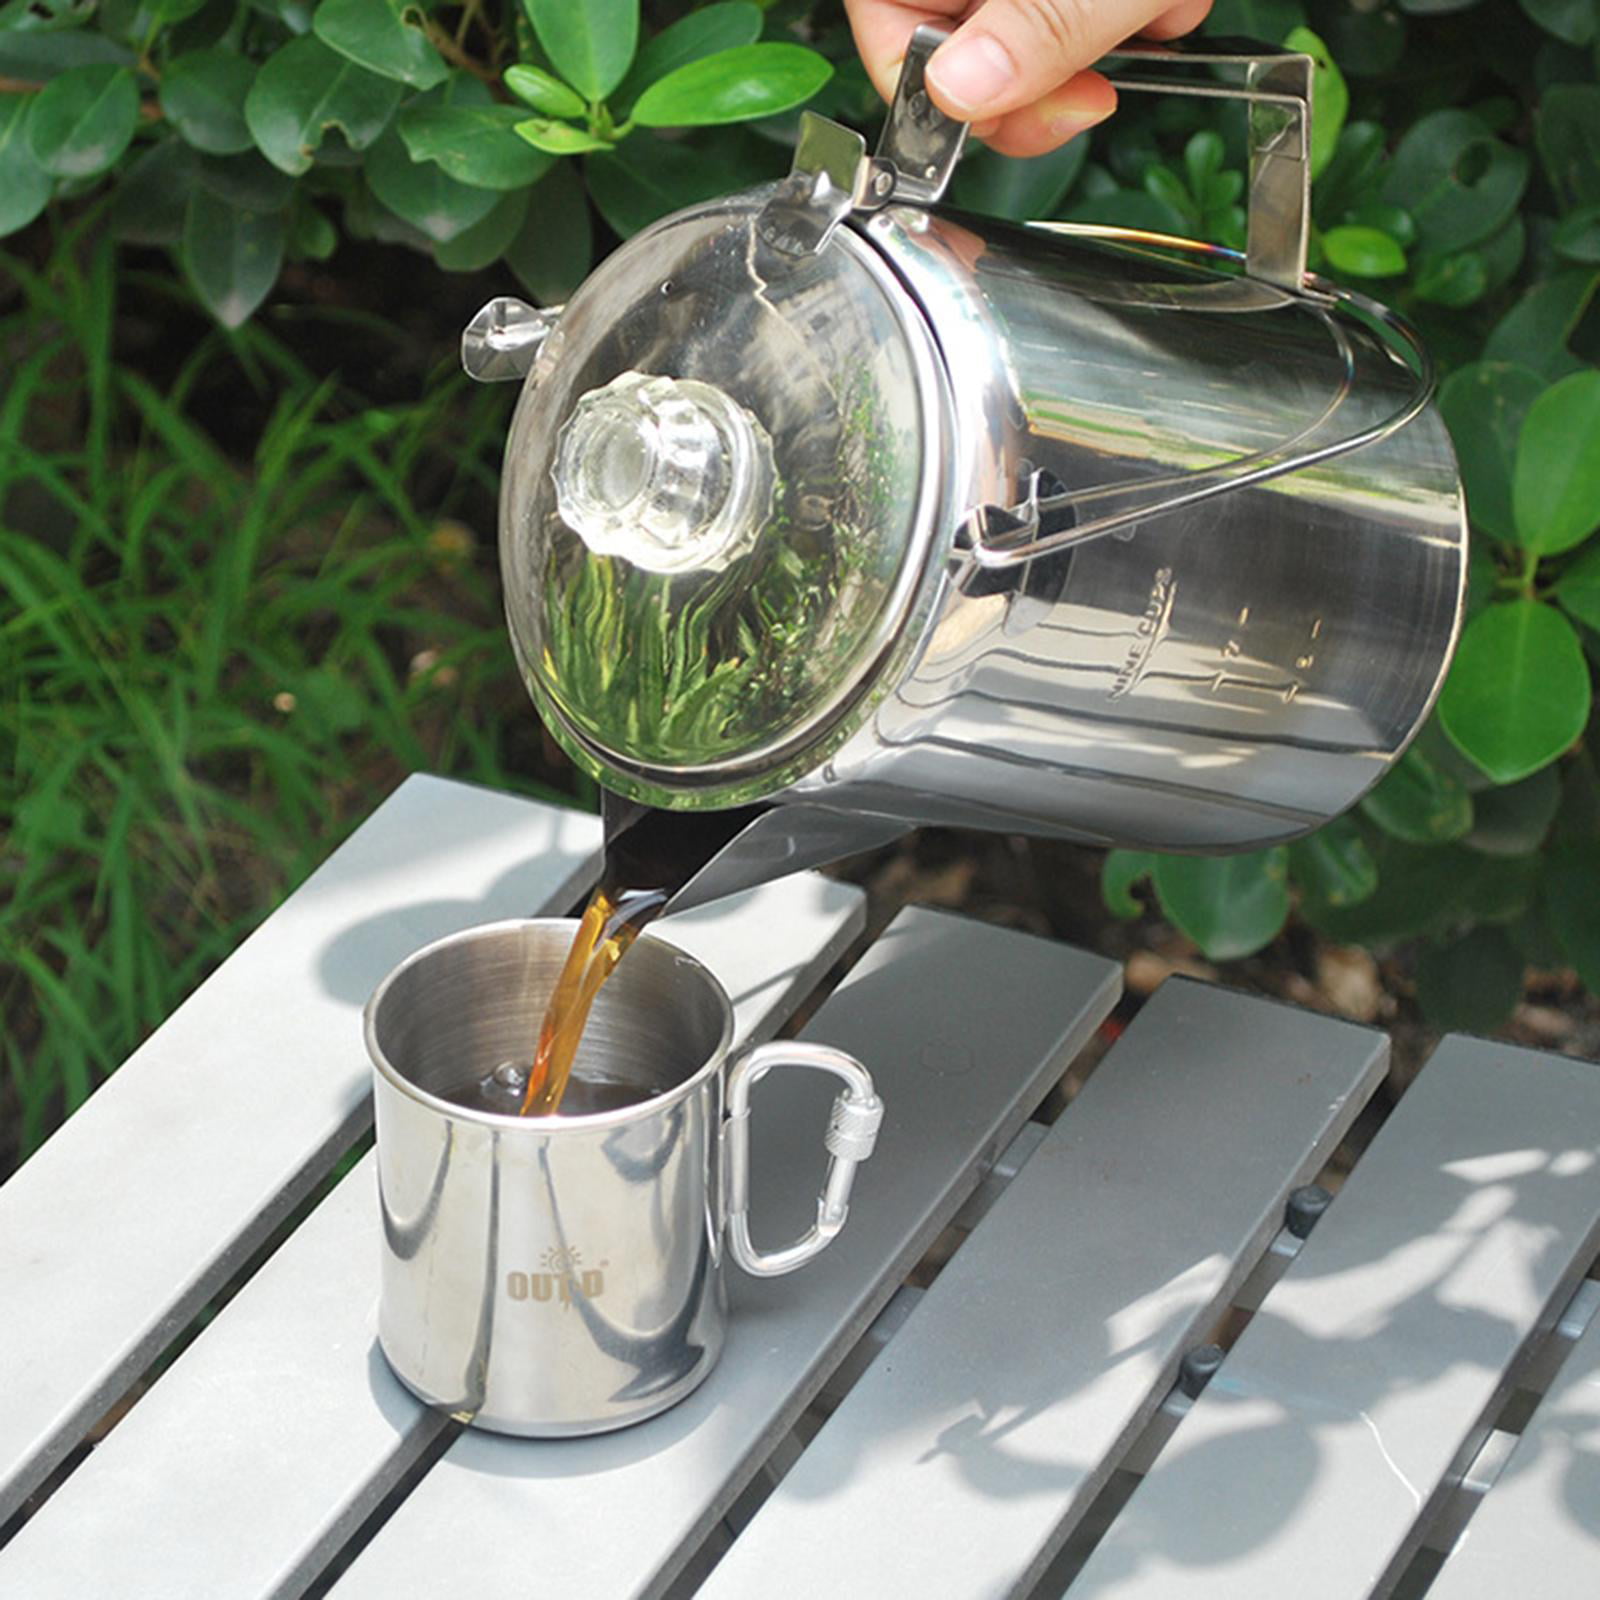 APOXCON Camping Coffee Percolator Pot 304 Stainless Steel for Coffee Making Outdoor Traveling Campfire Stovetop Fast Brew Kettle 9 Cups